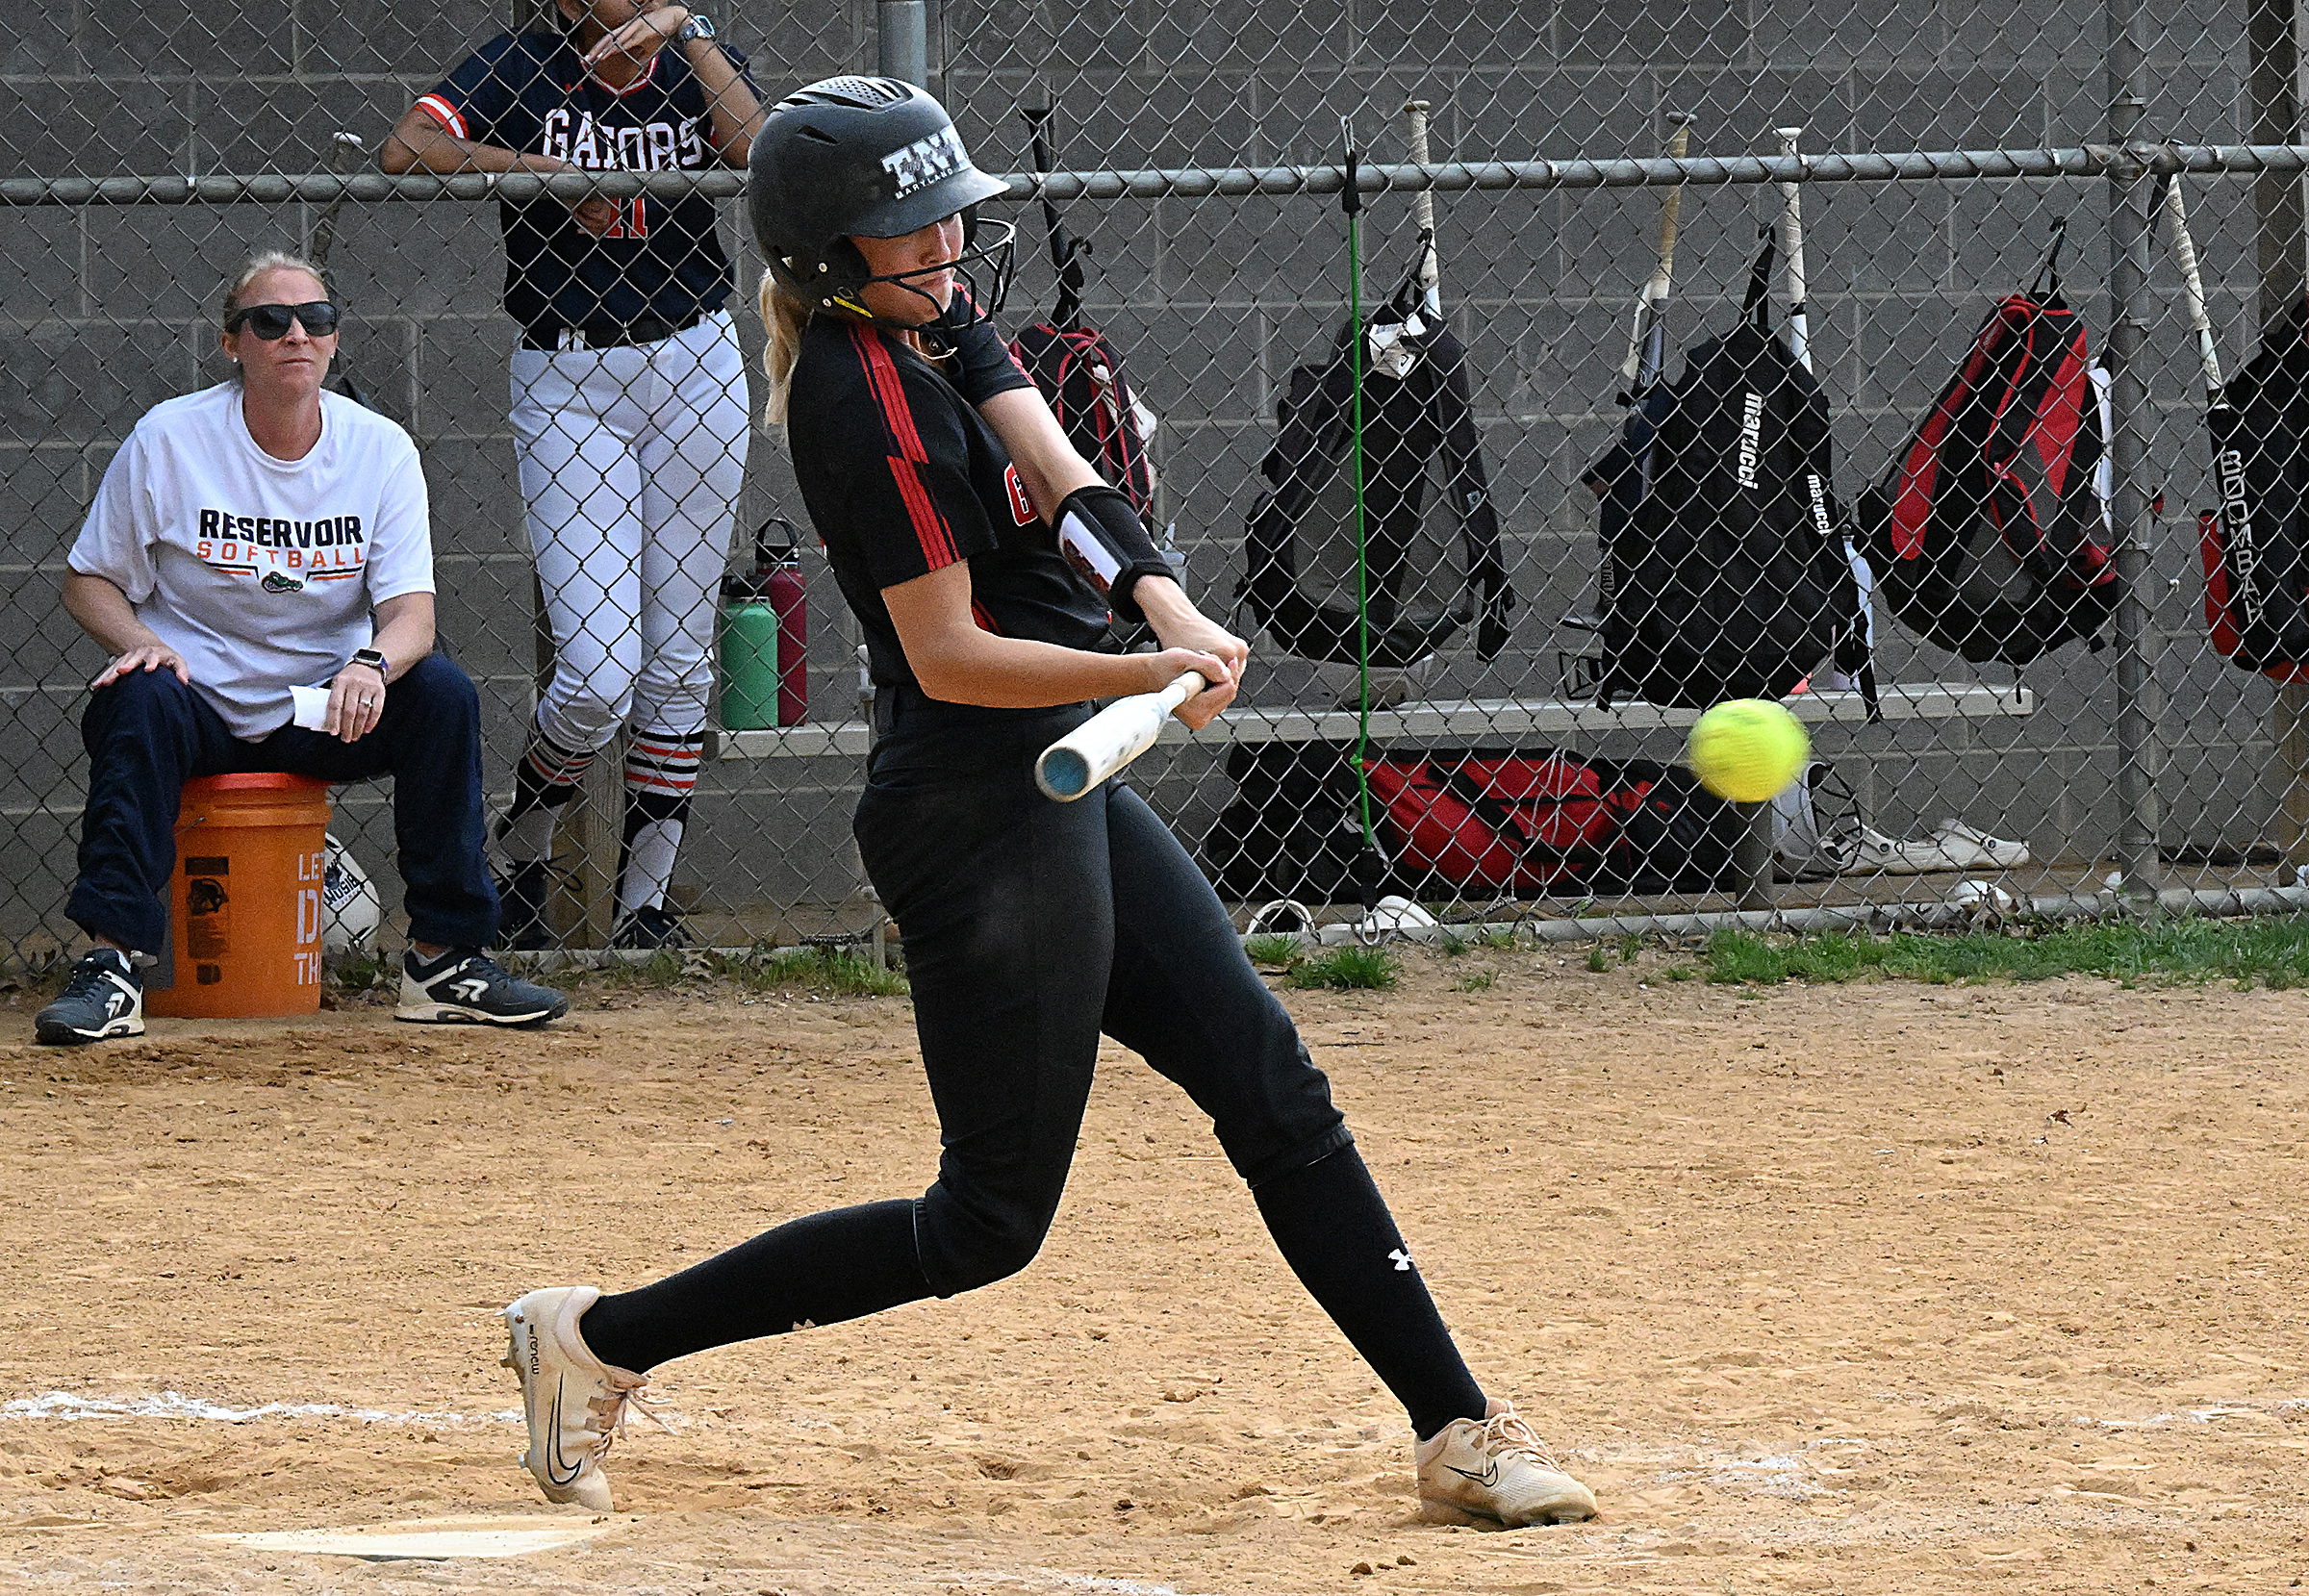 Glenelg's Reese Holden hits a two-run double to center field...